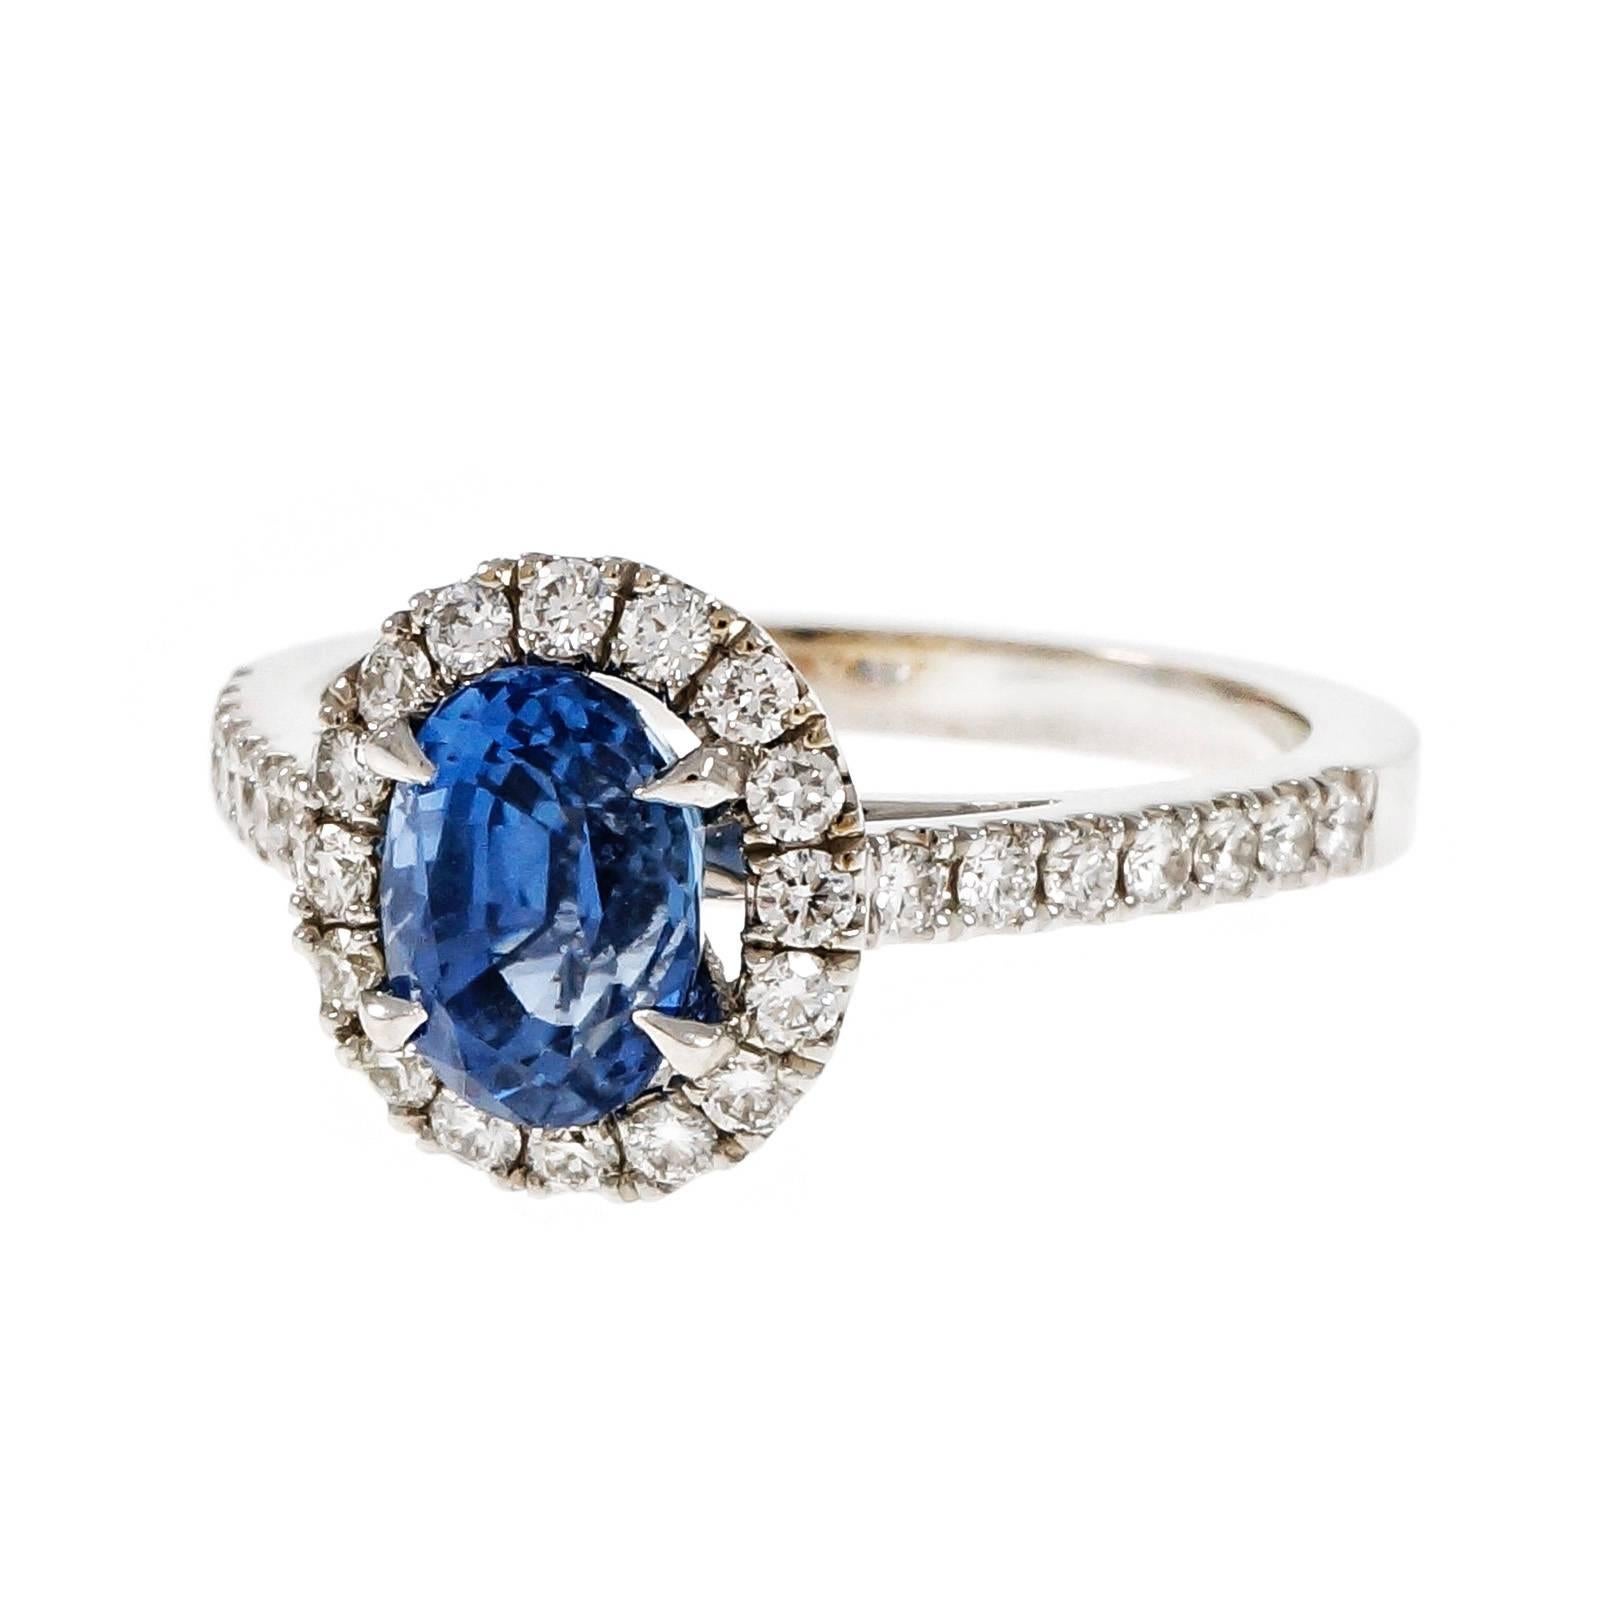 Peter Suchy 18k white gold Halo engagement ring with a bright medium blue center oval Sapphire AGL certified simple heat only. The ring is designed to fit a wedding band flush against it.

1 oval blue sapphire, approx. total weight 1.77cts, simple